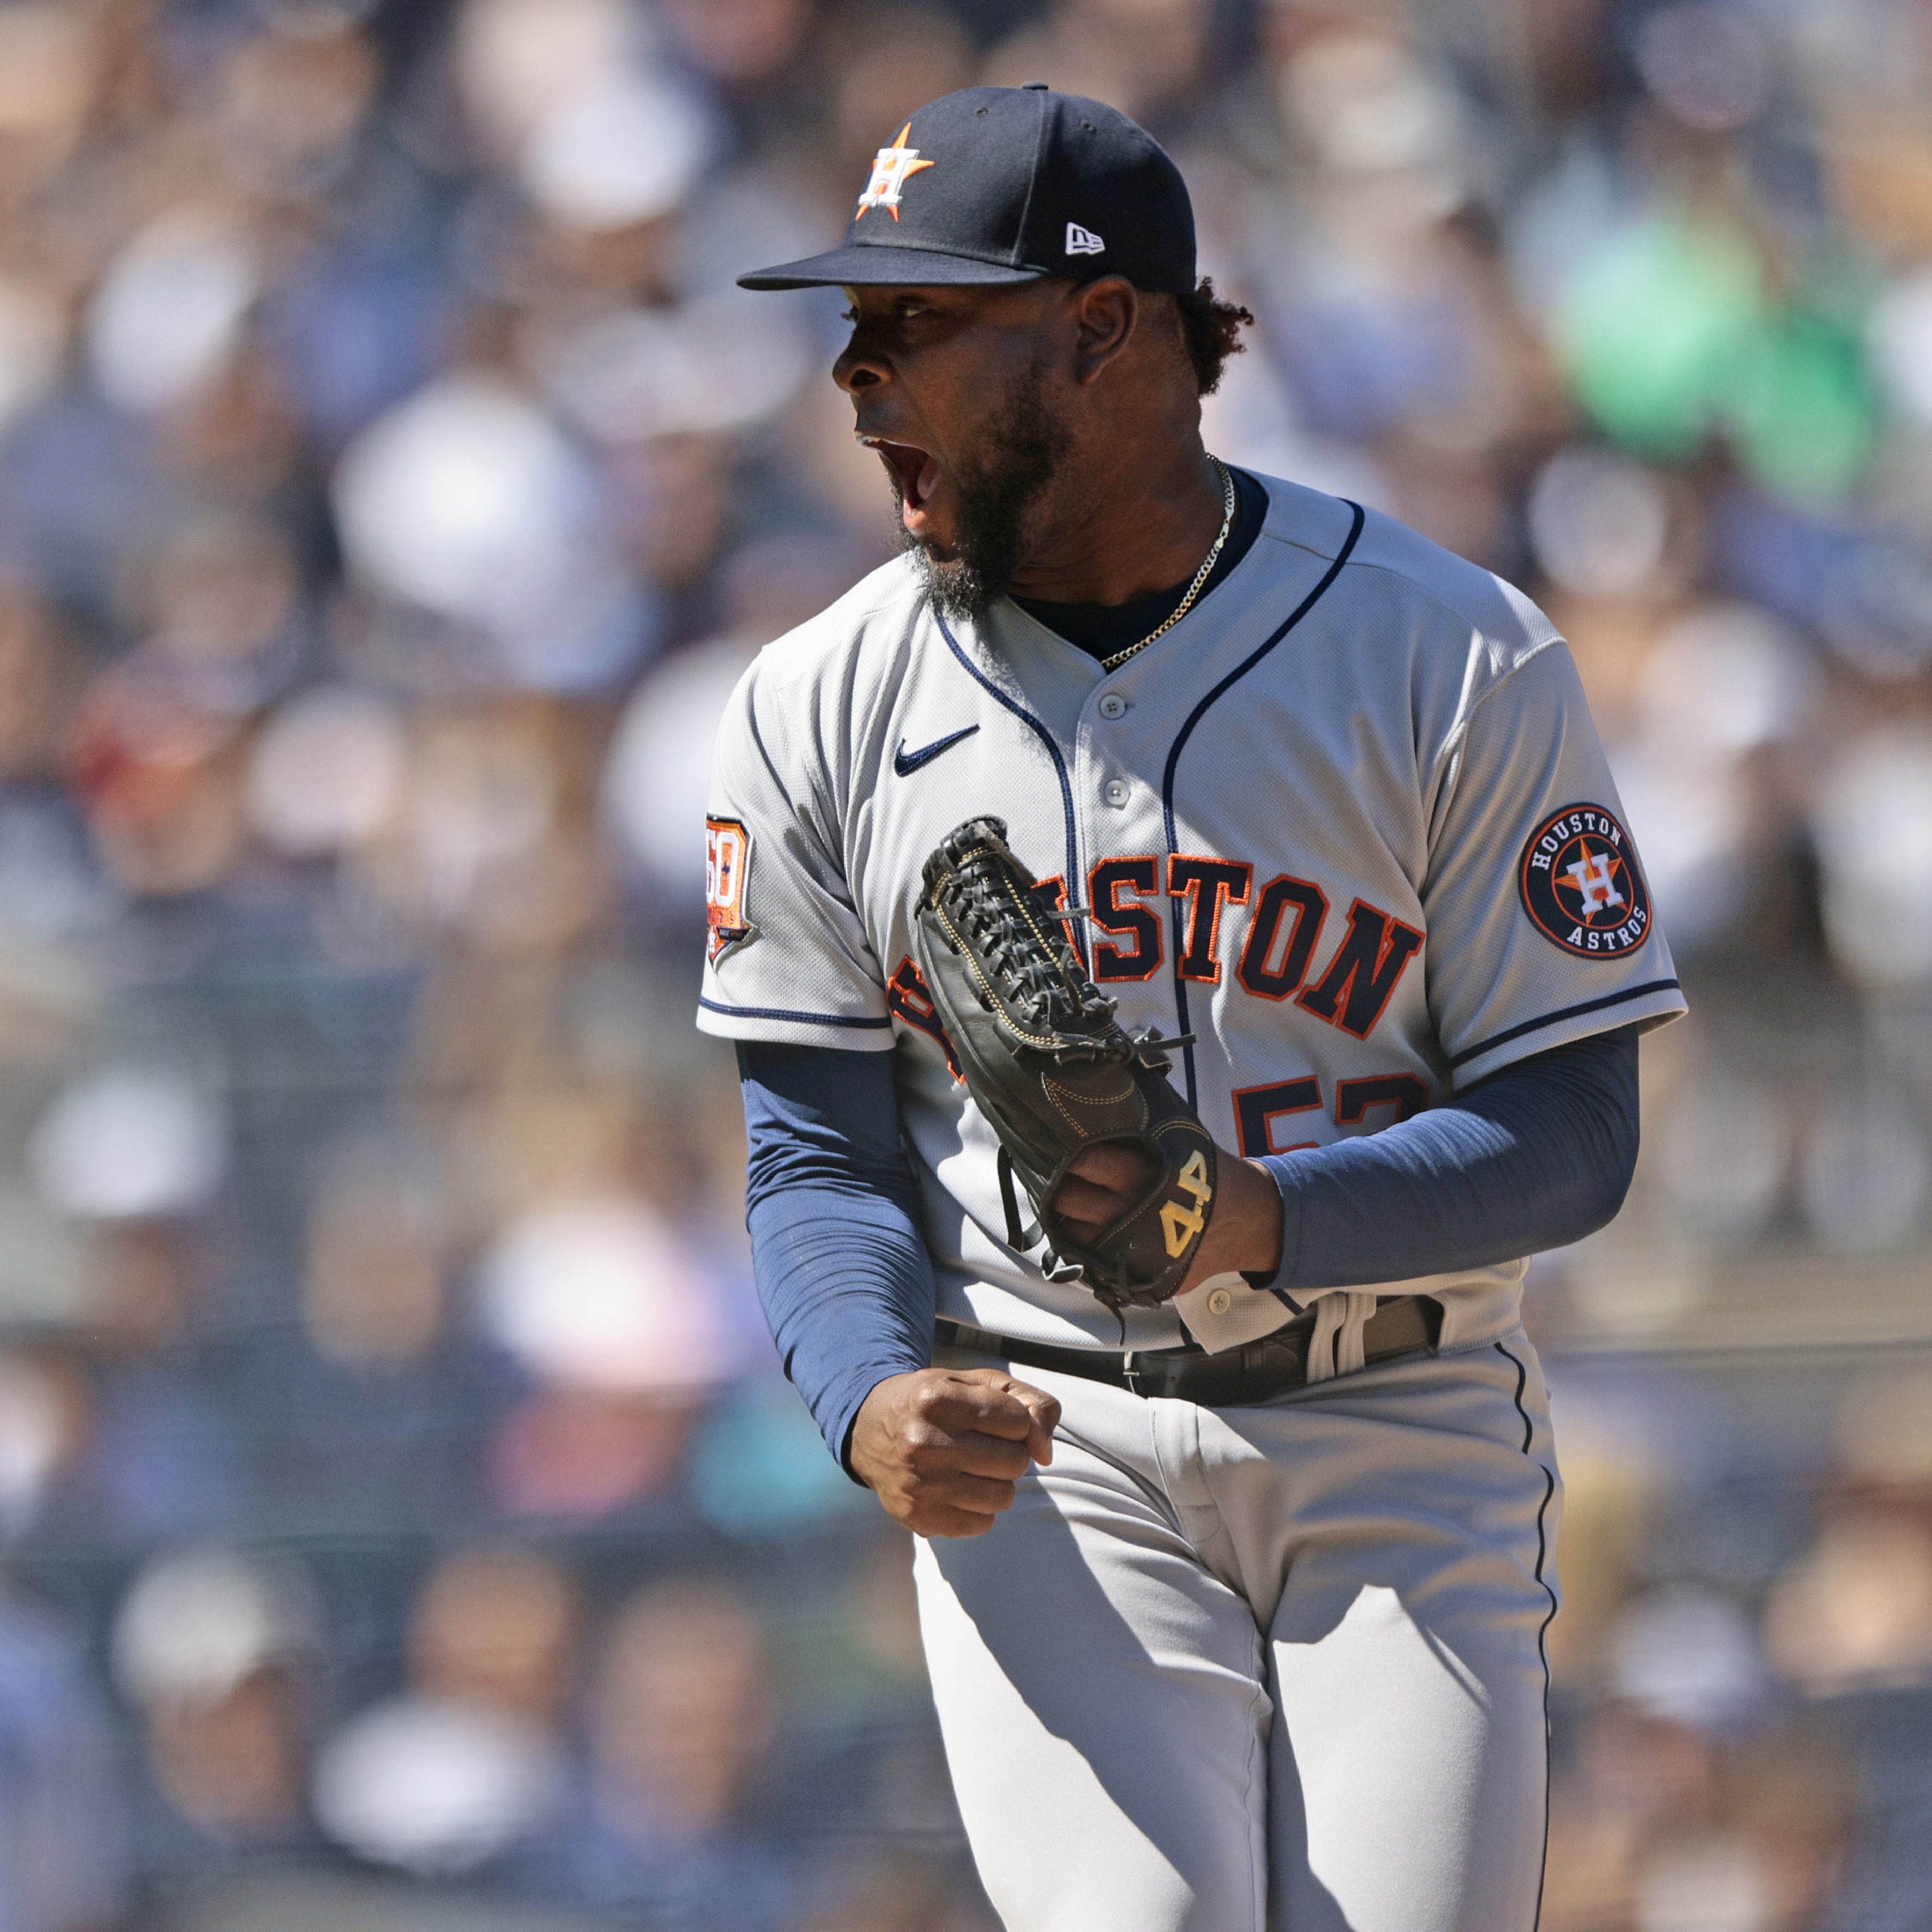 Yankees No-Hit for 1st Time Since 2003 as Cristian Javier, Astros Combine for No-No